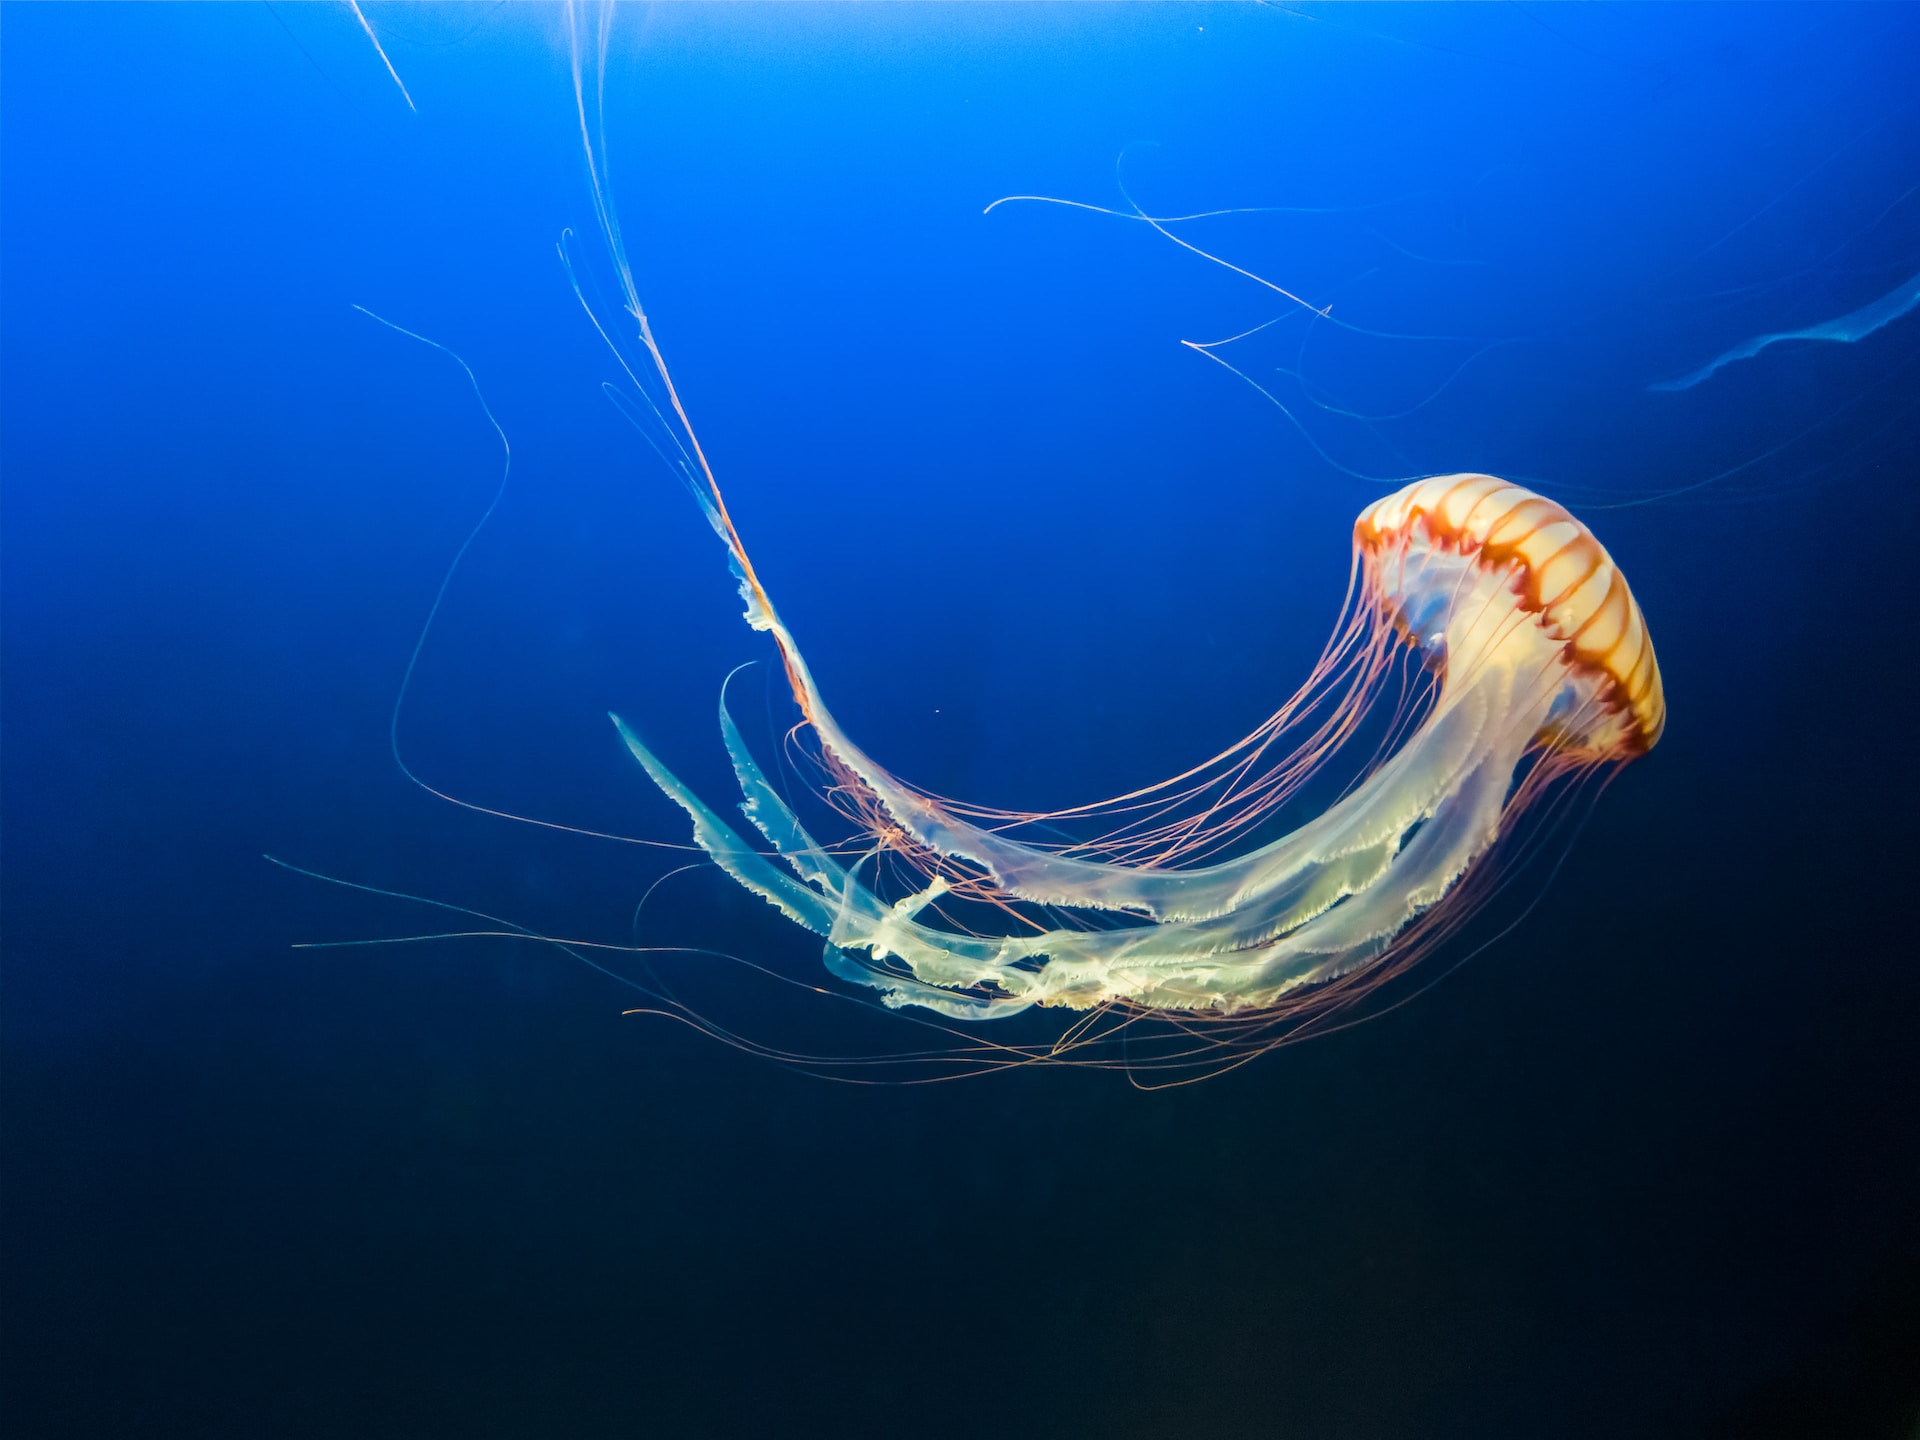 From Immortal Jellyfish to Upside-Down Stamps: 5 Surprising Facts